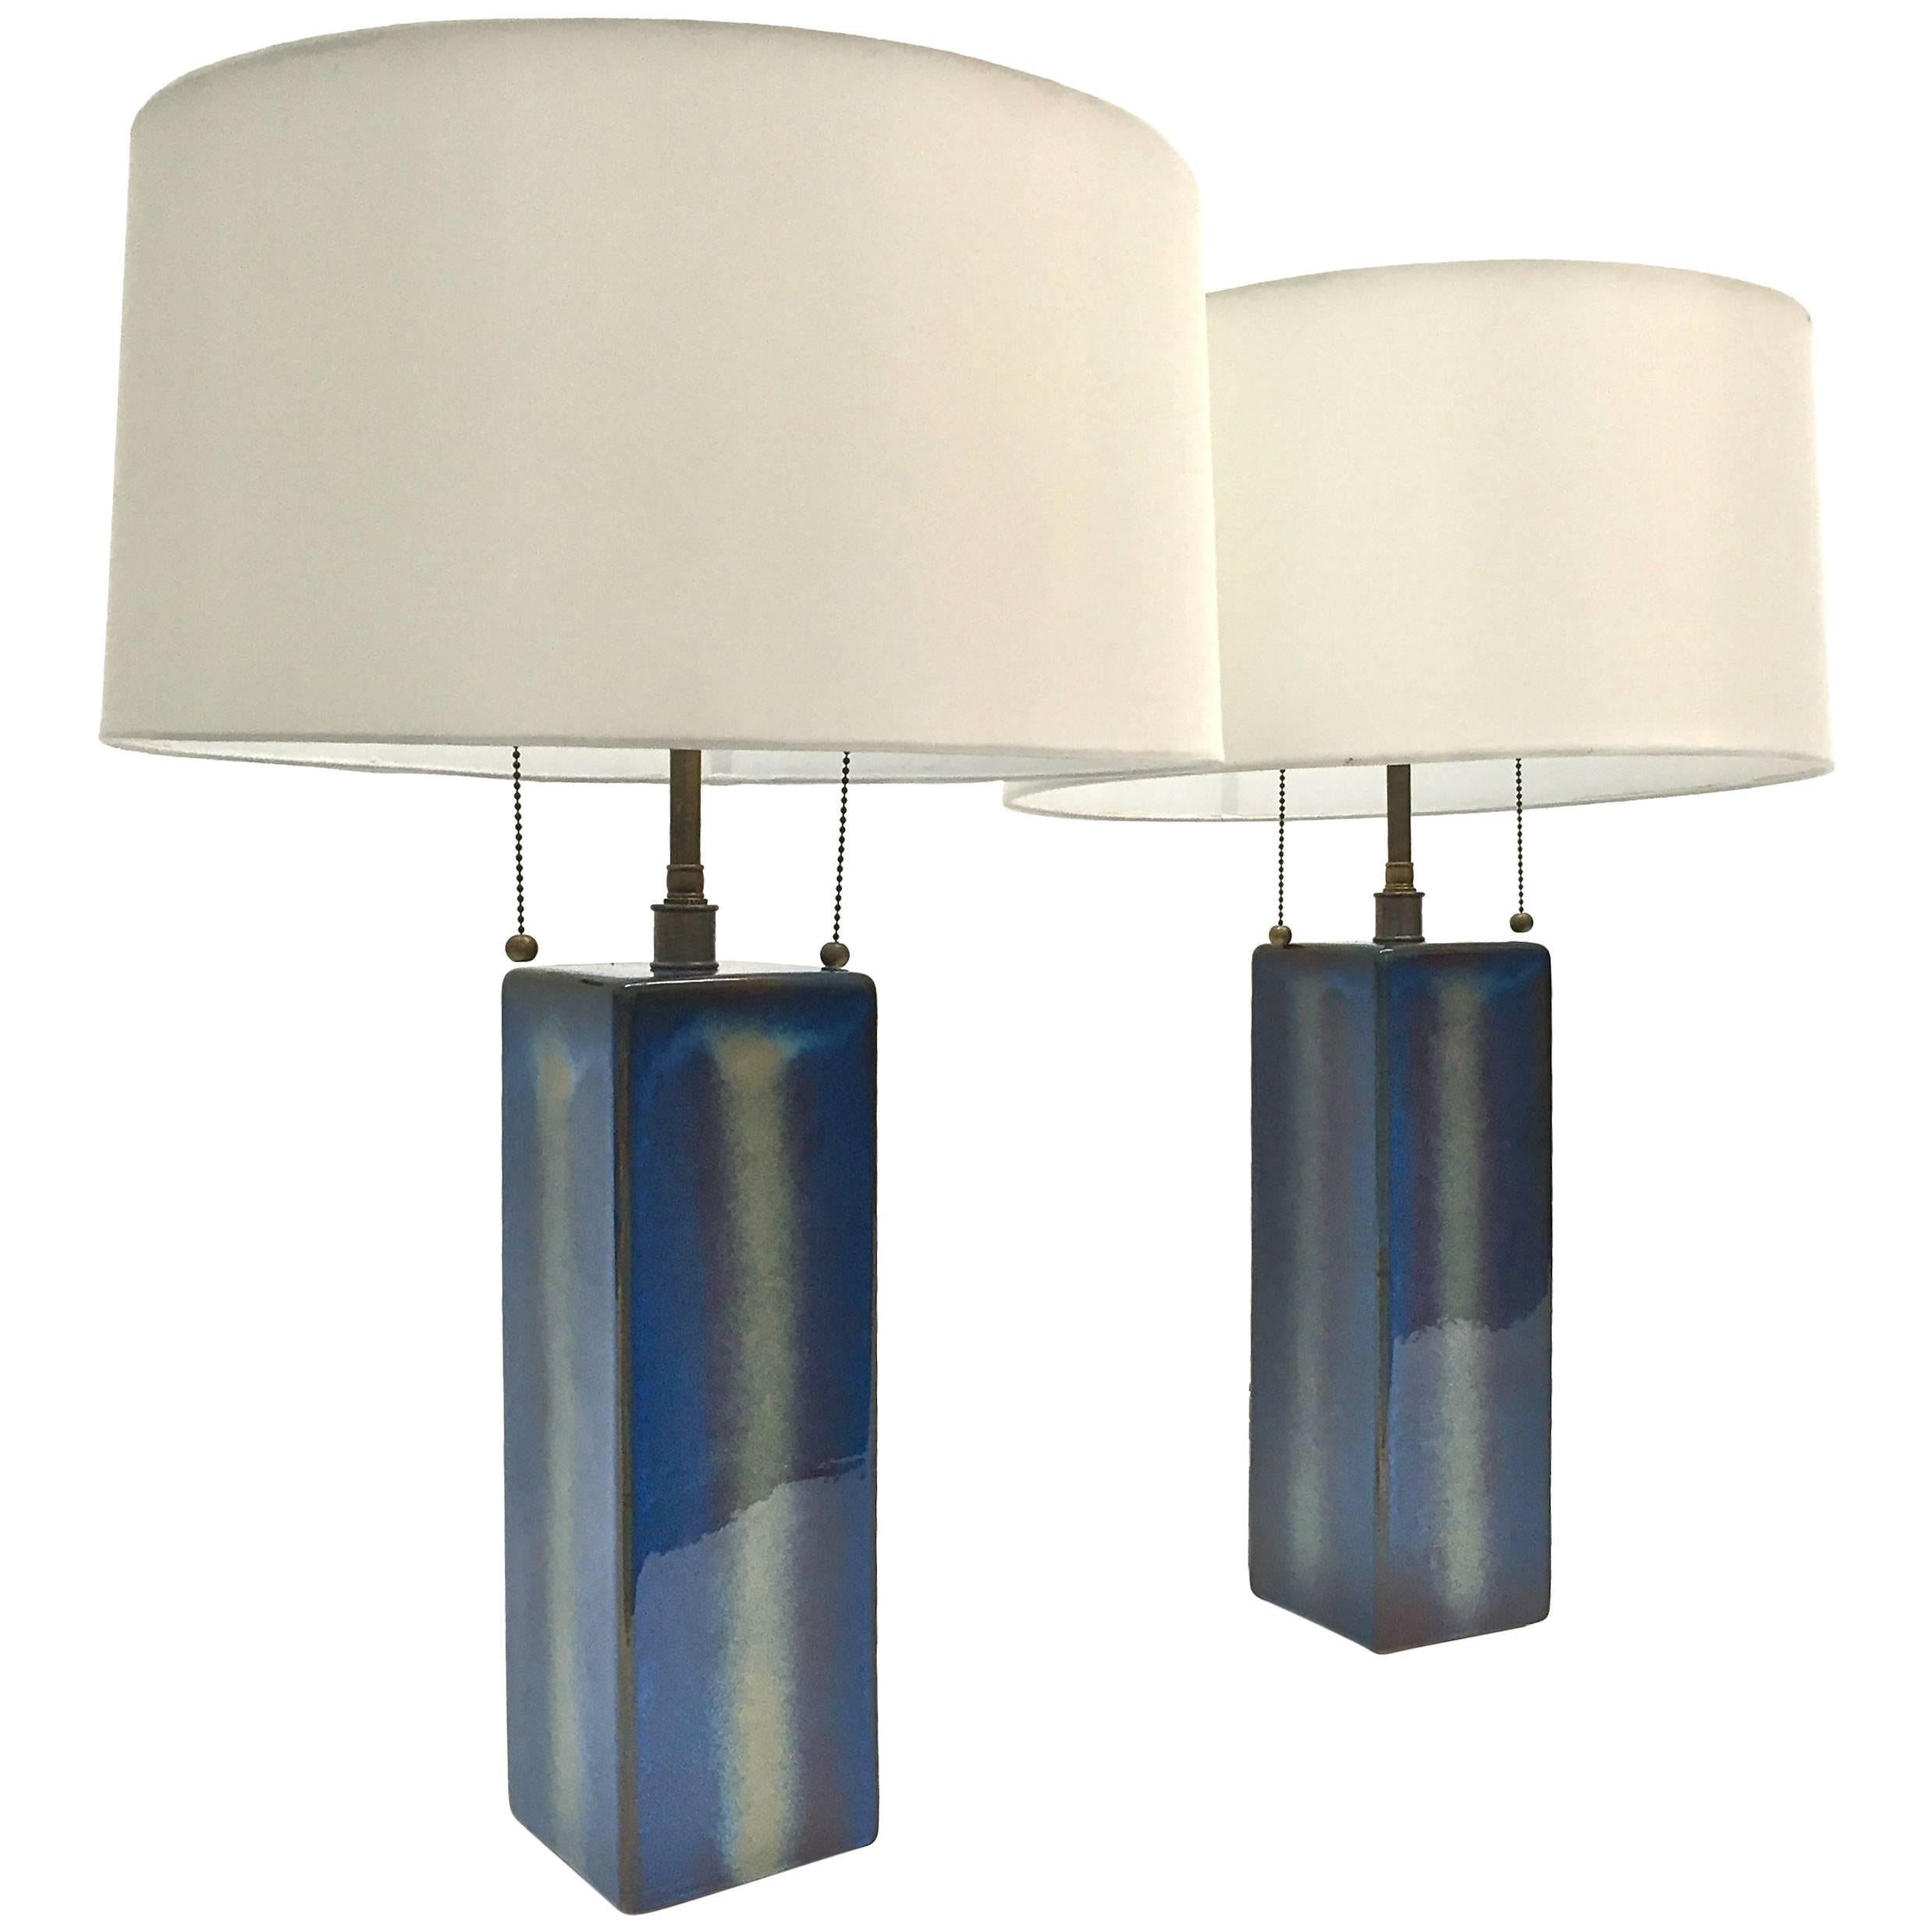 Pair of Large Table Lamps by Soholm Pottery